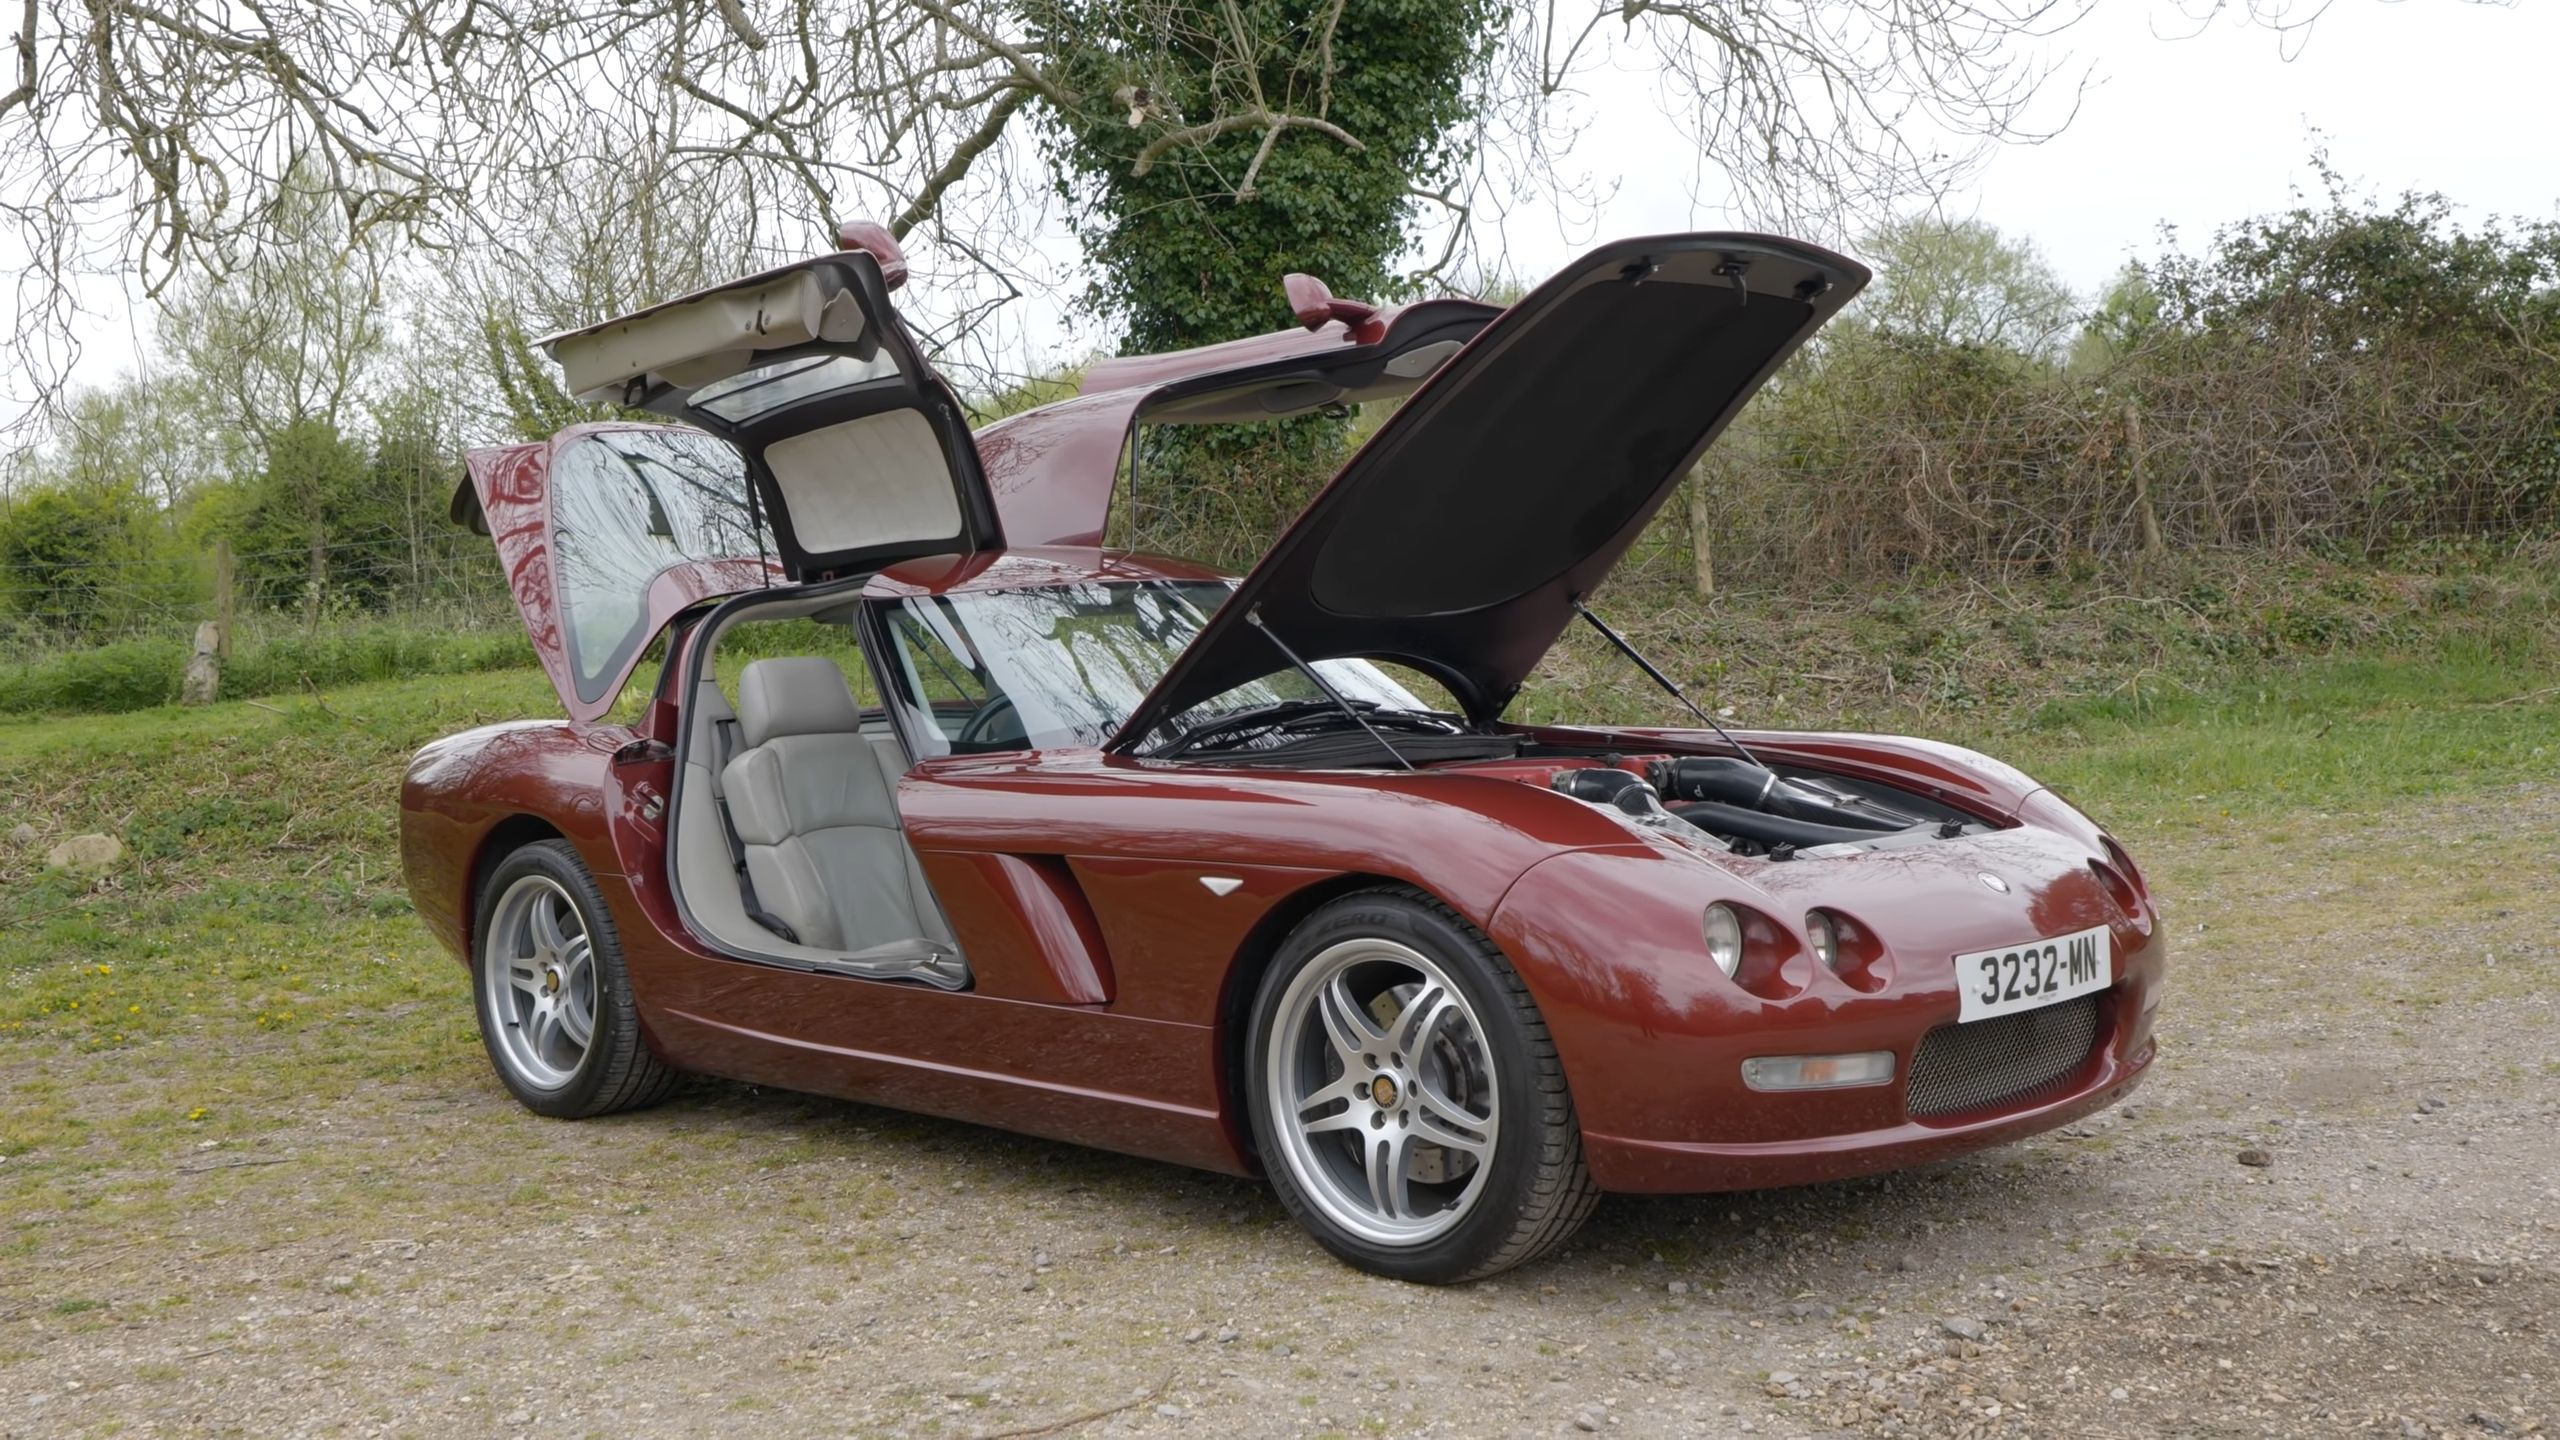 2023 Blast From The Past: The Bristol Fighter Is a Viper V-10-powered Unicorn With Gullwing Doors